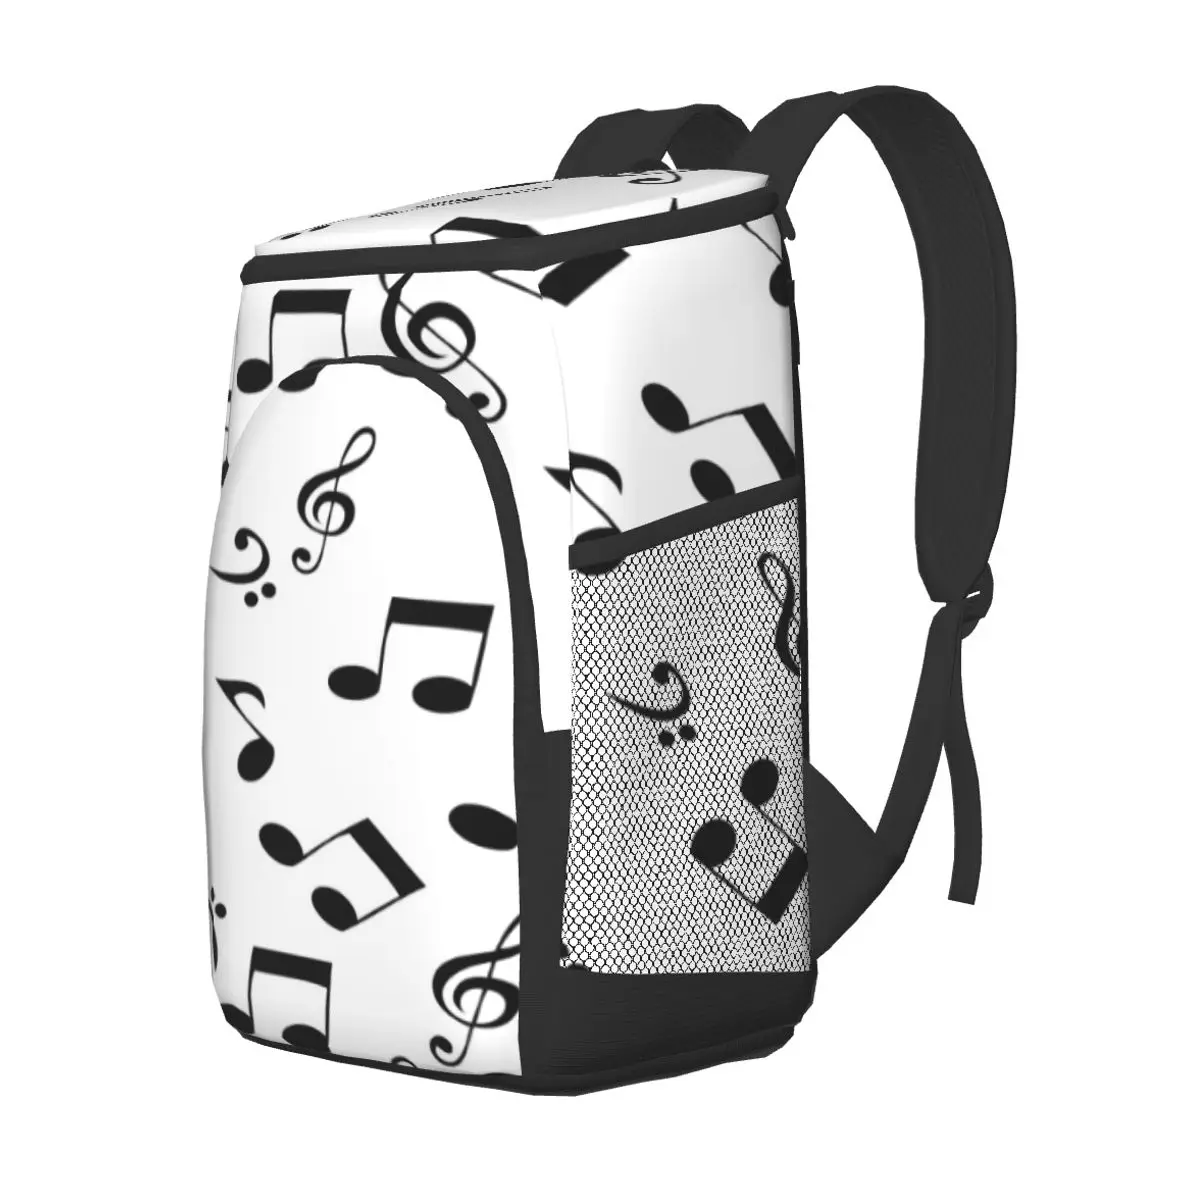 protable insulated thermal cooler waterproof lunch bag abstract music notes picnic camping backpack double shoulder wine bag free global shipping